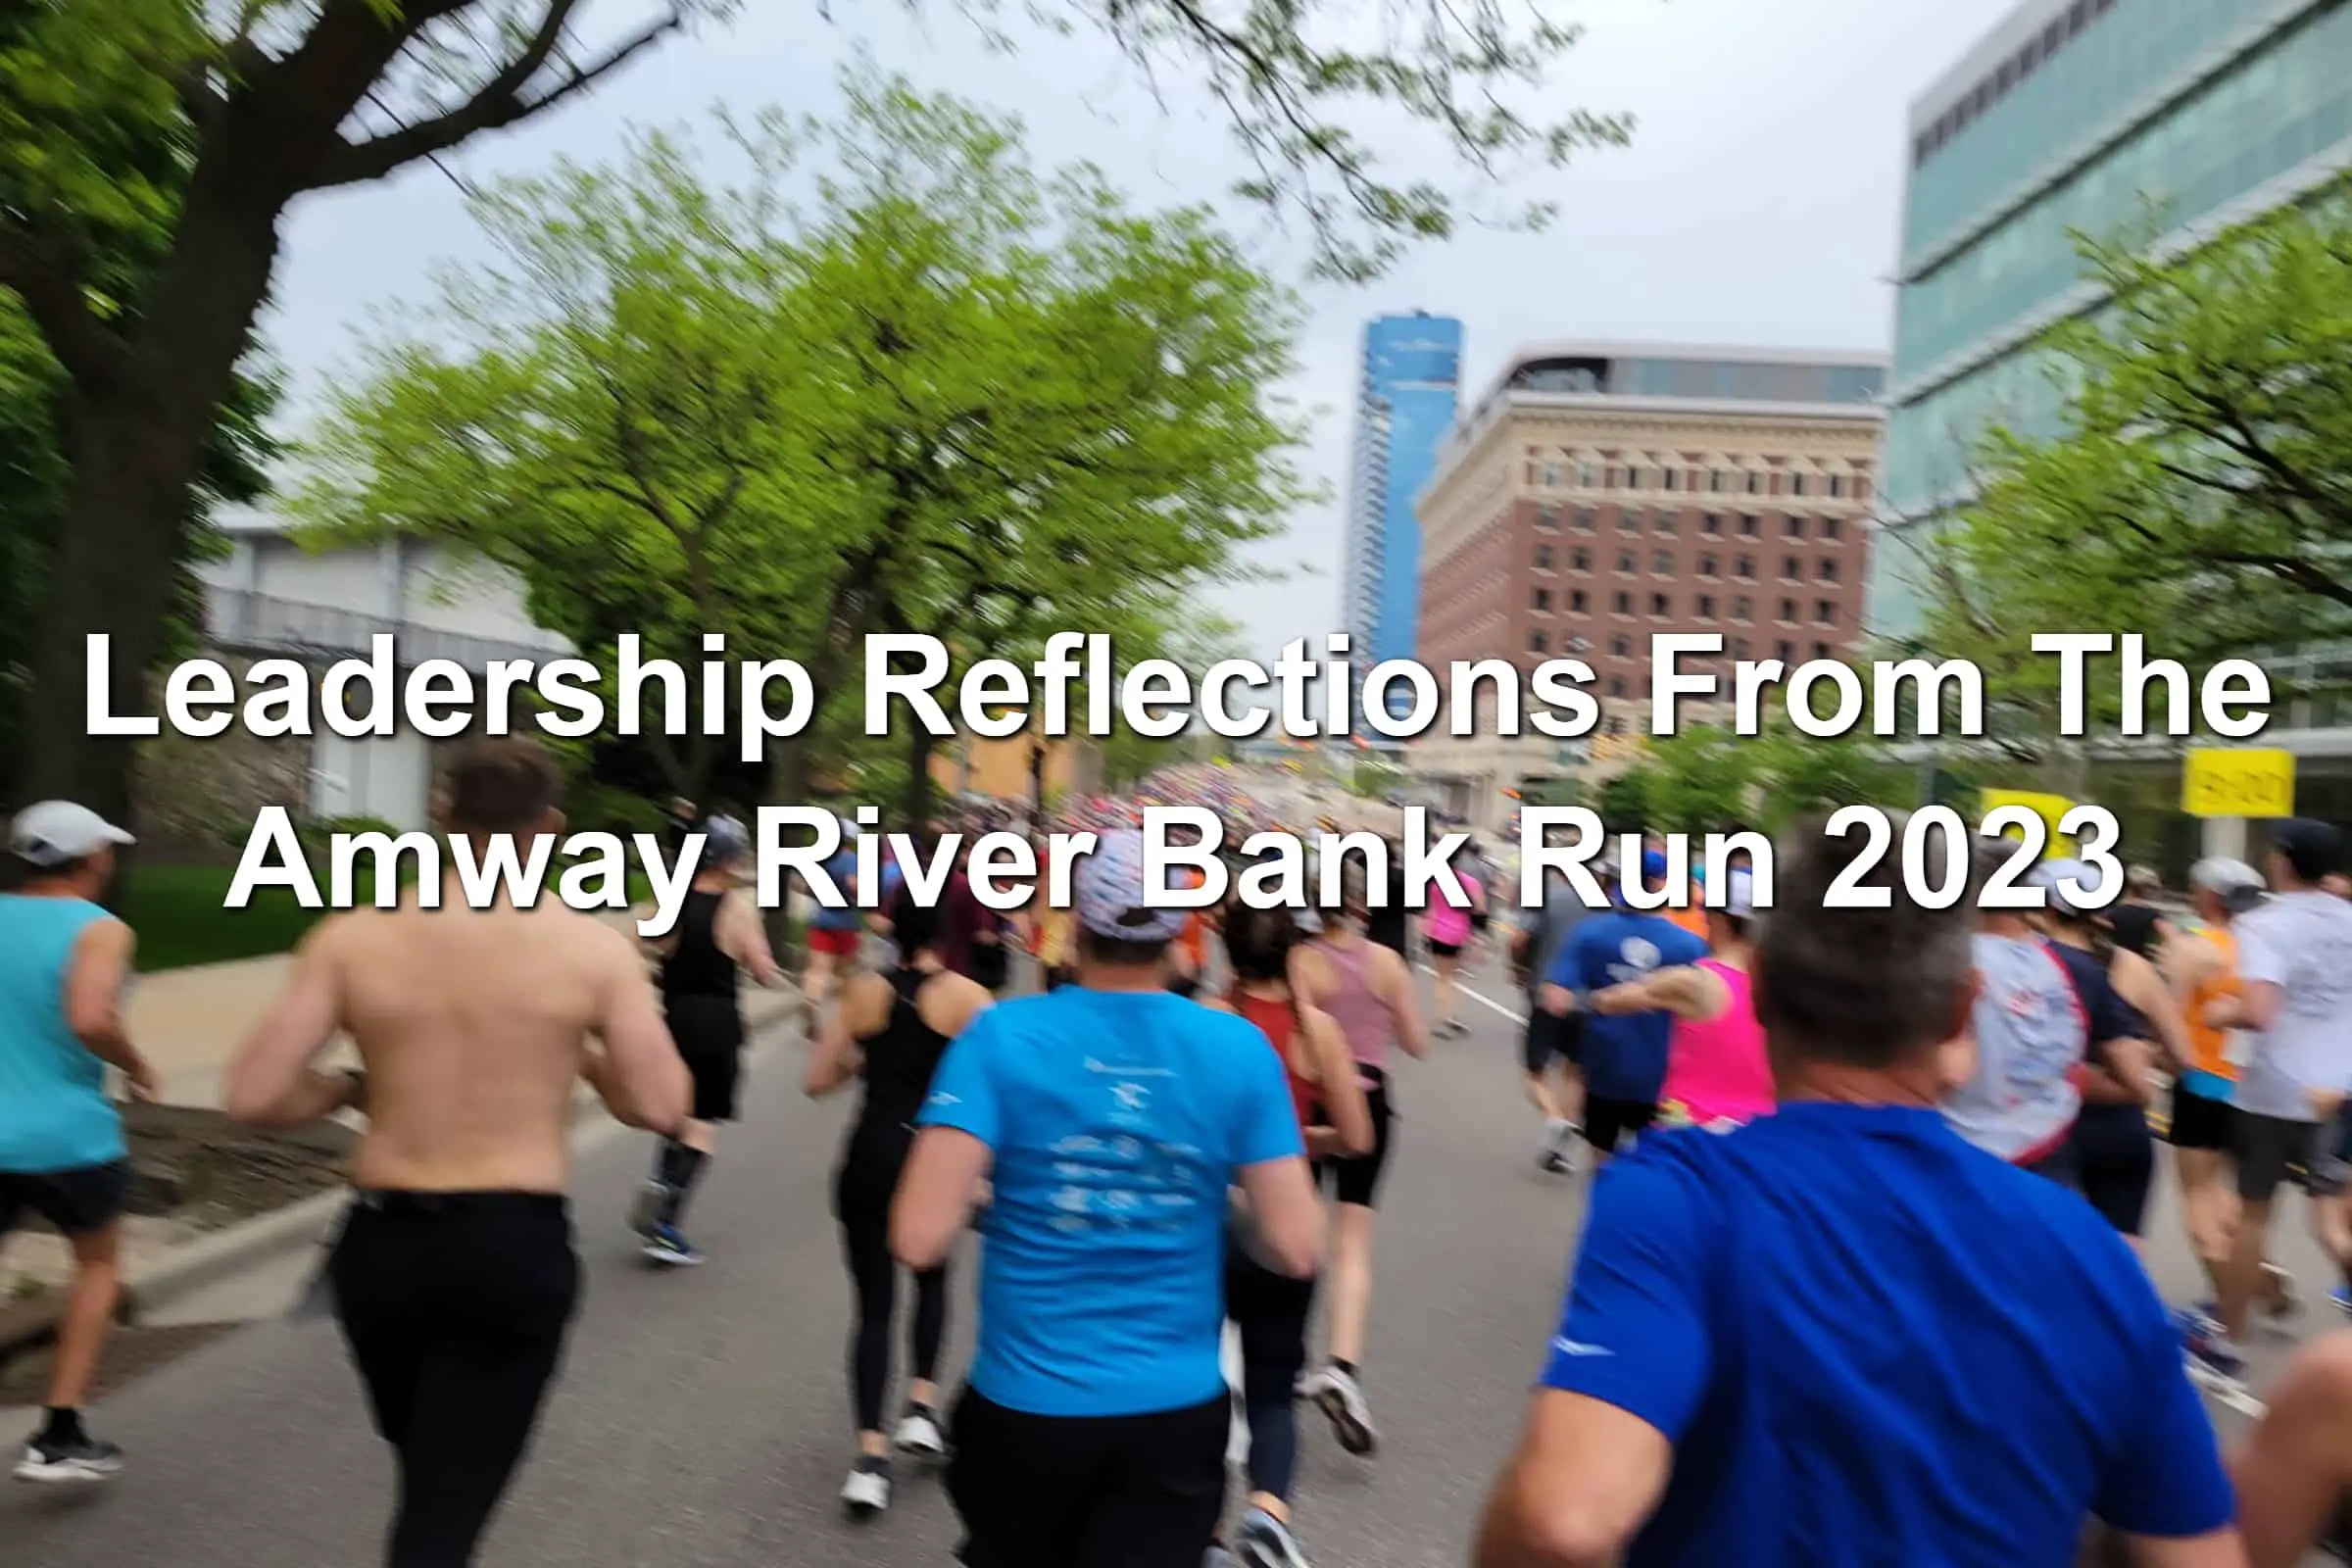 Runners running the streets of Grand Rapids, Michigan for the 46th annual Amway River Bank Run